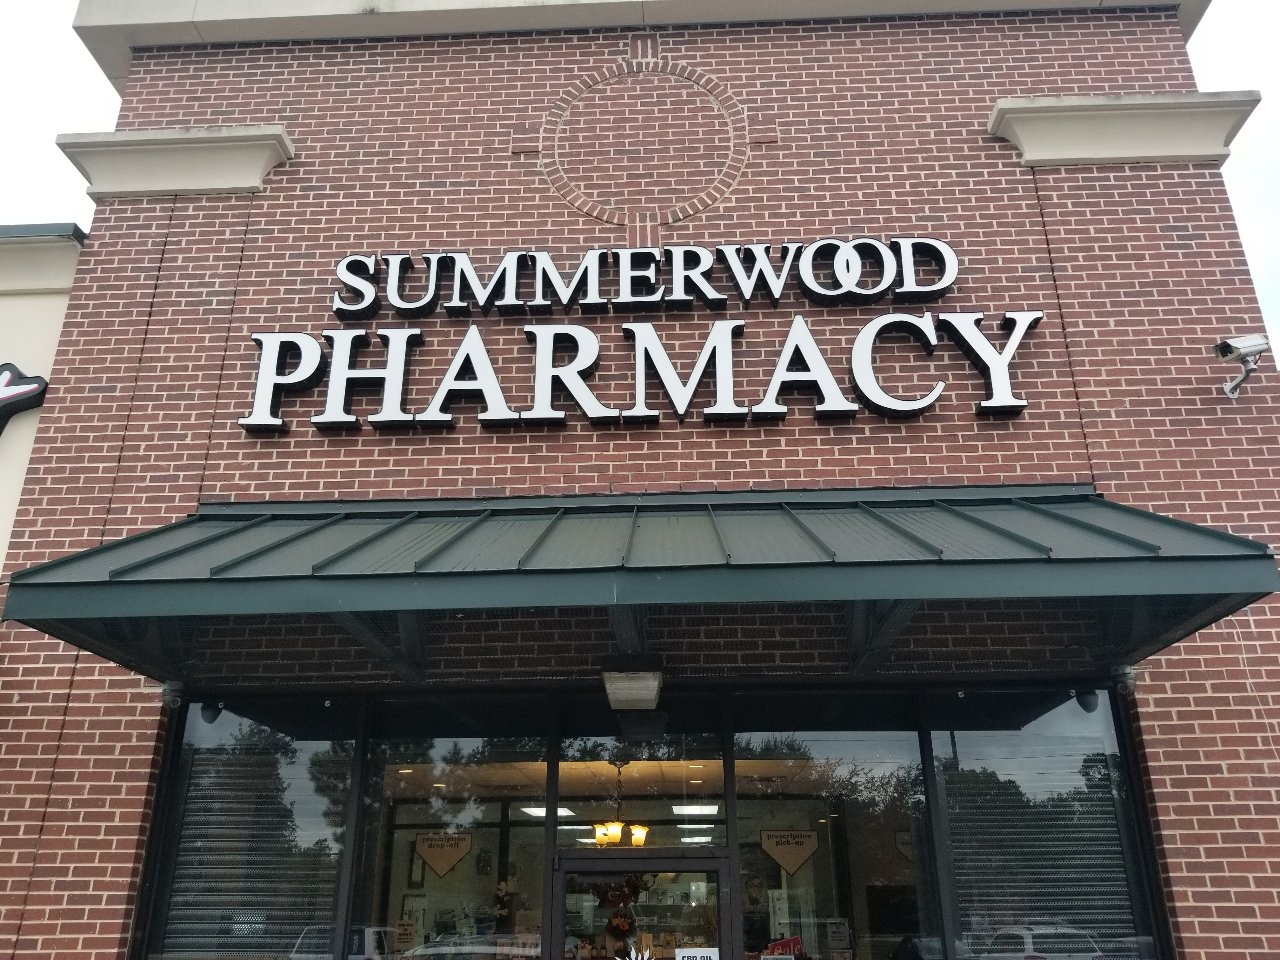 Summerwood Pharmacy and Compounding - Humble Area